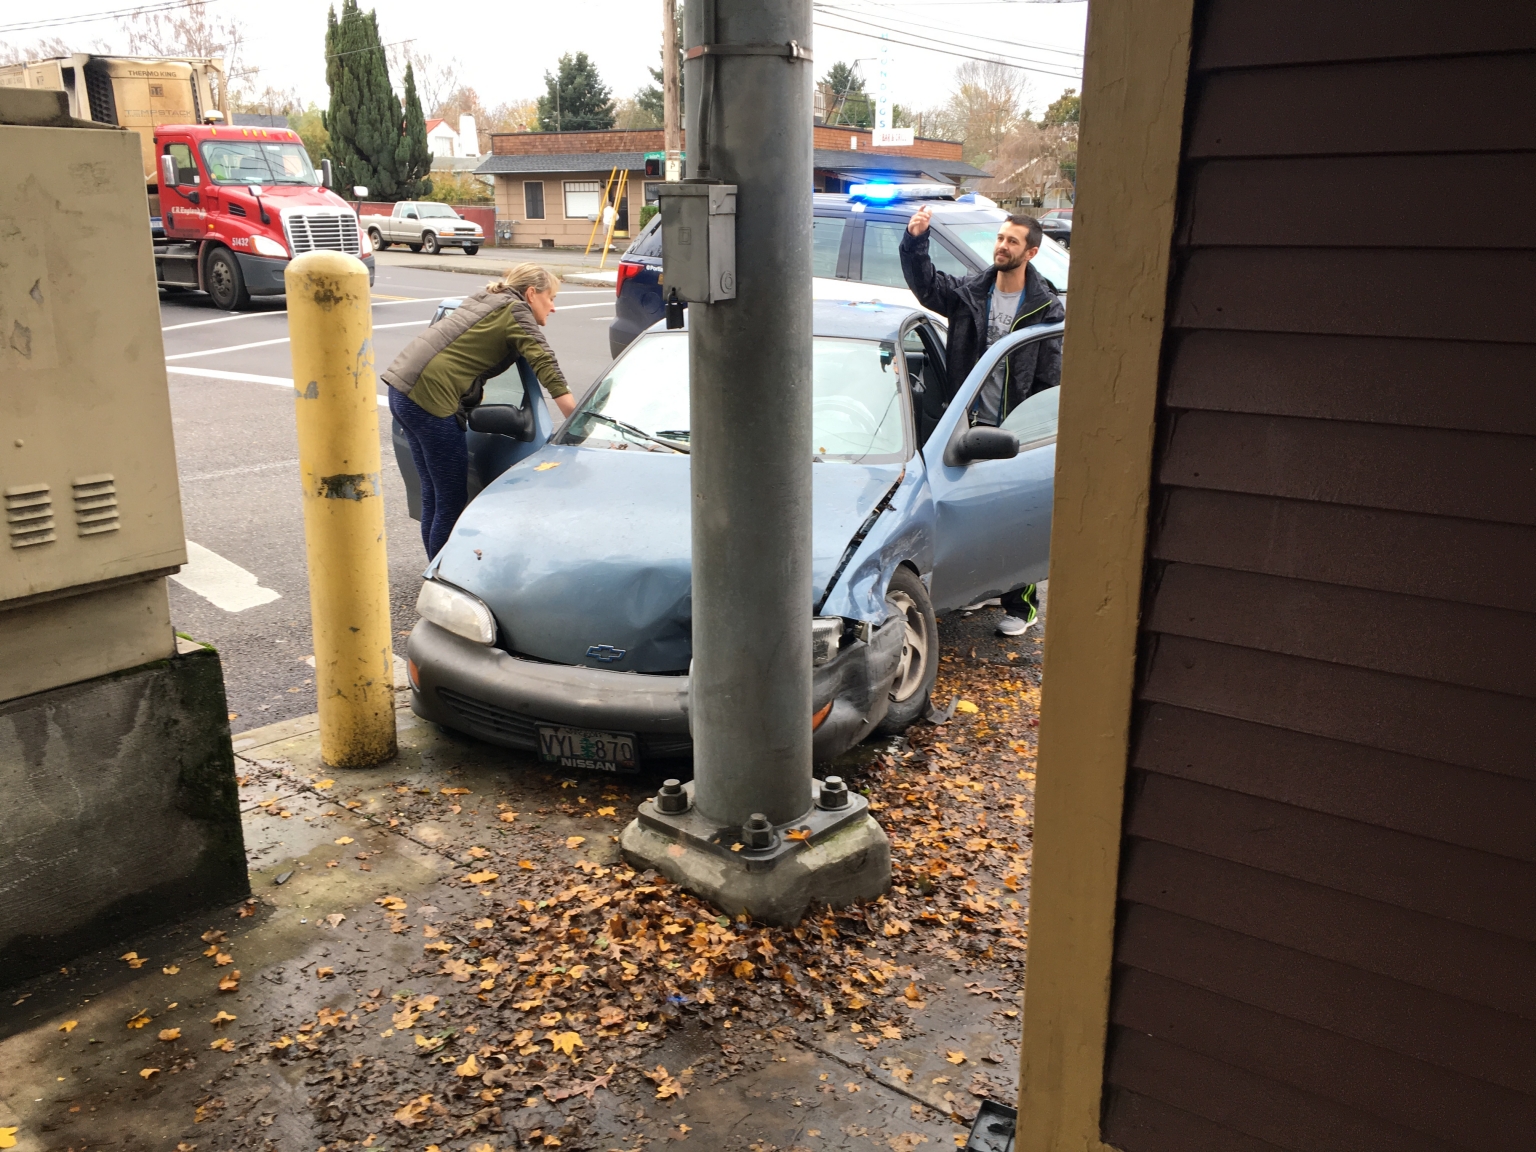 These people crashed into the pole